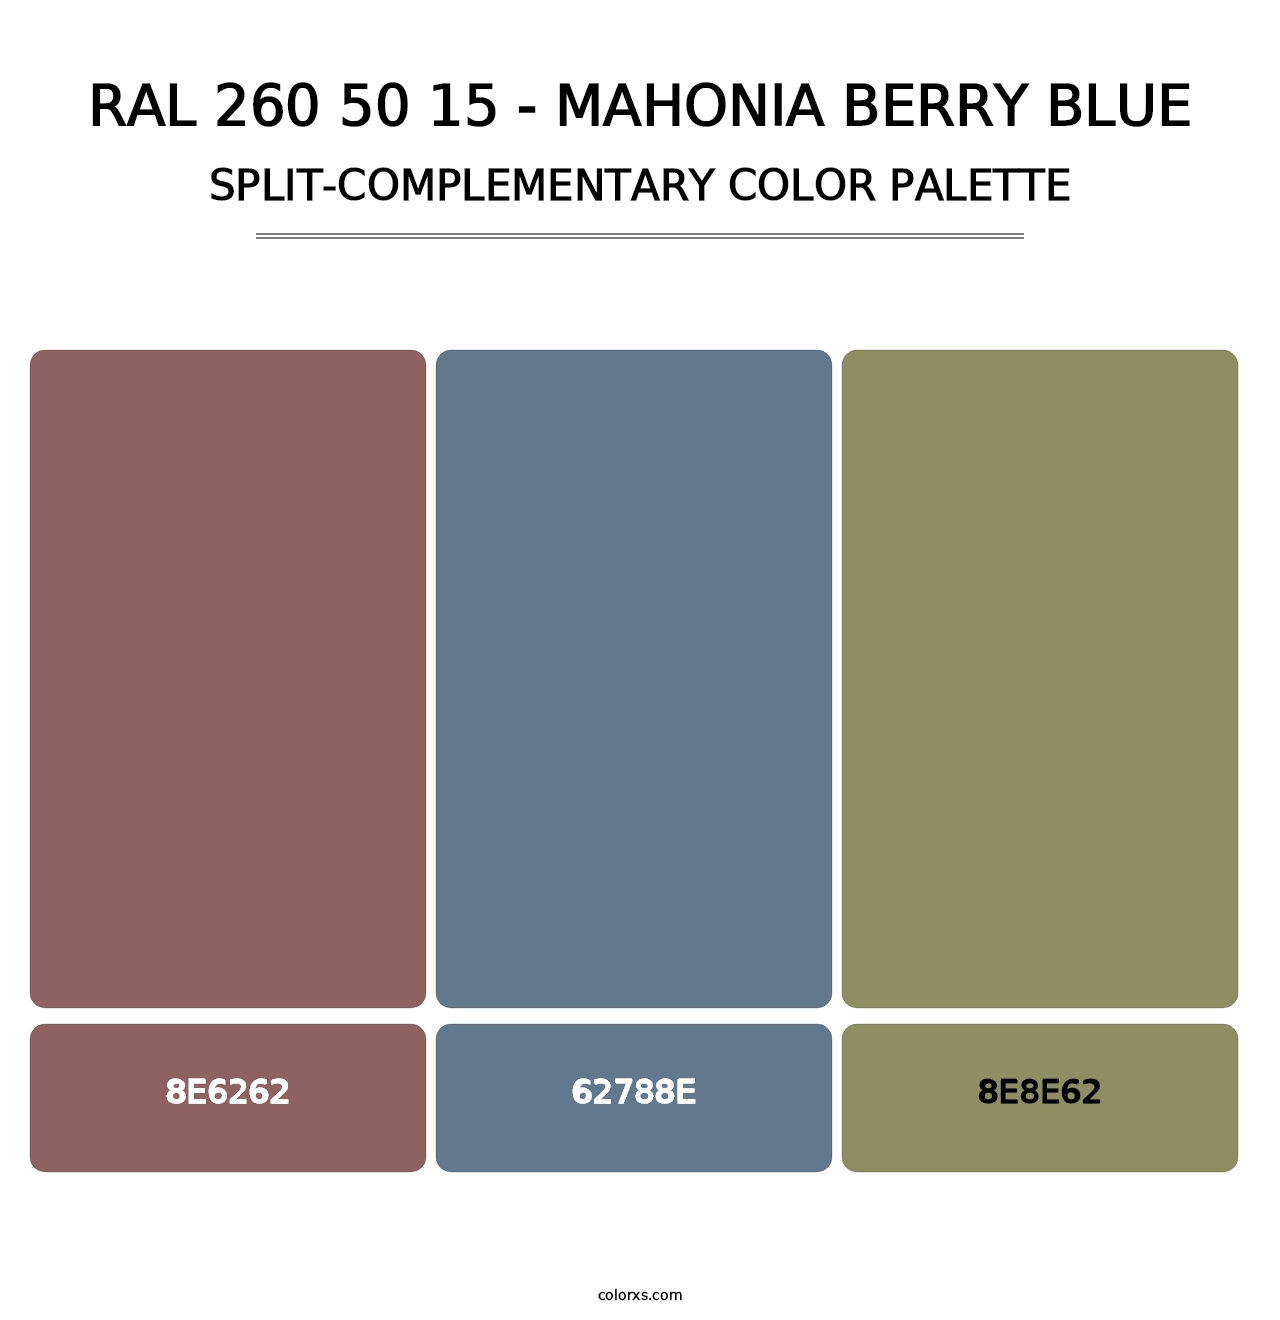 RAL 260 50 15 - Mahonia Berry Blue - Split-Complementary Color Palette